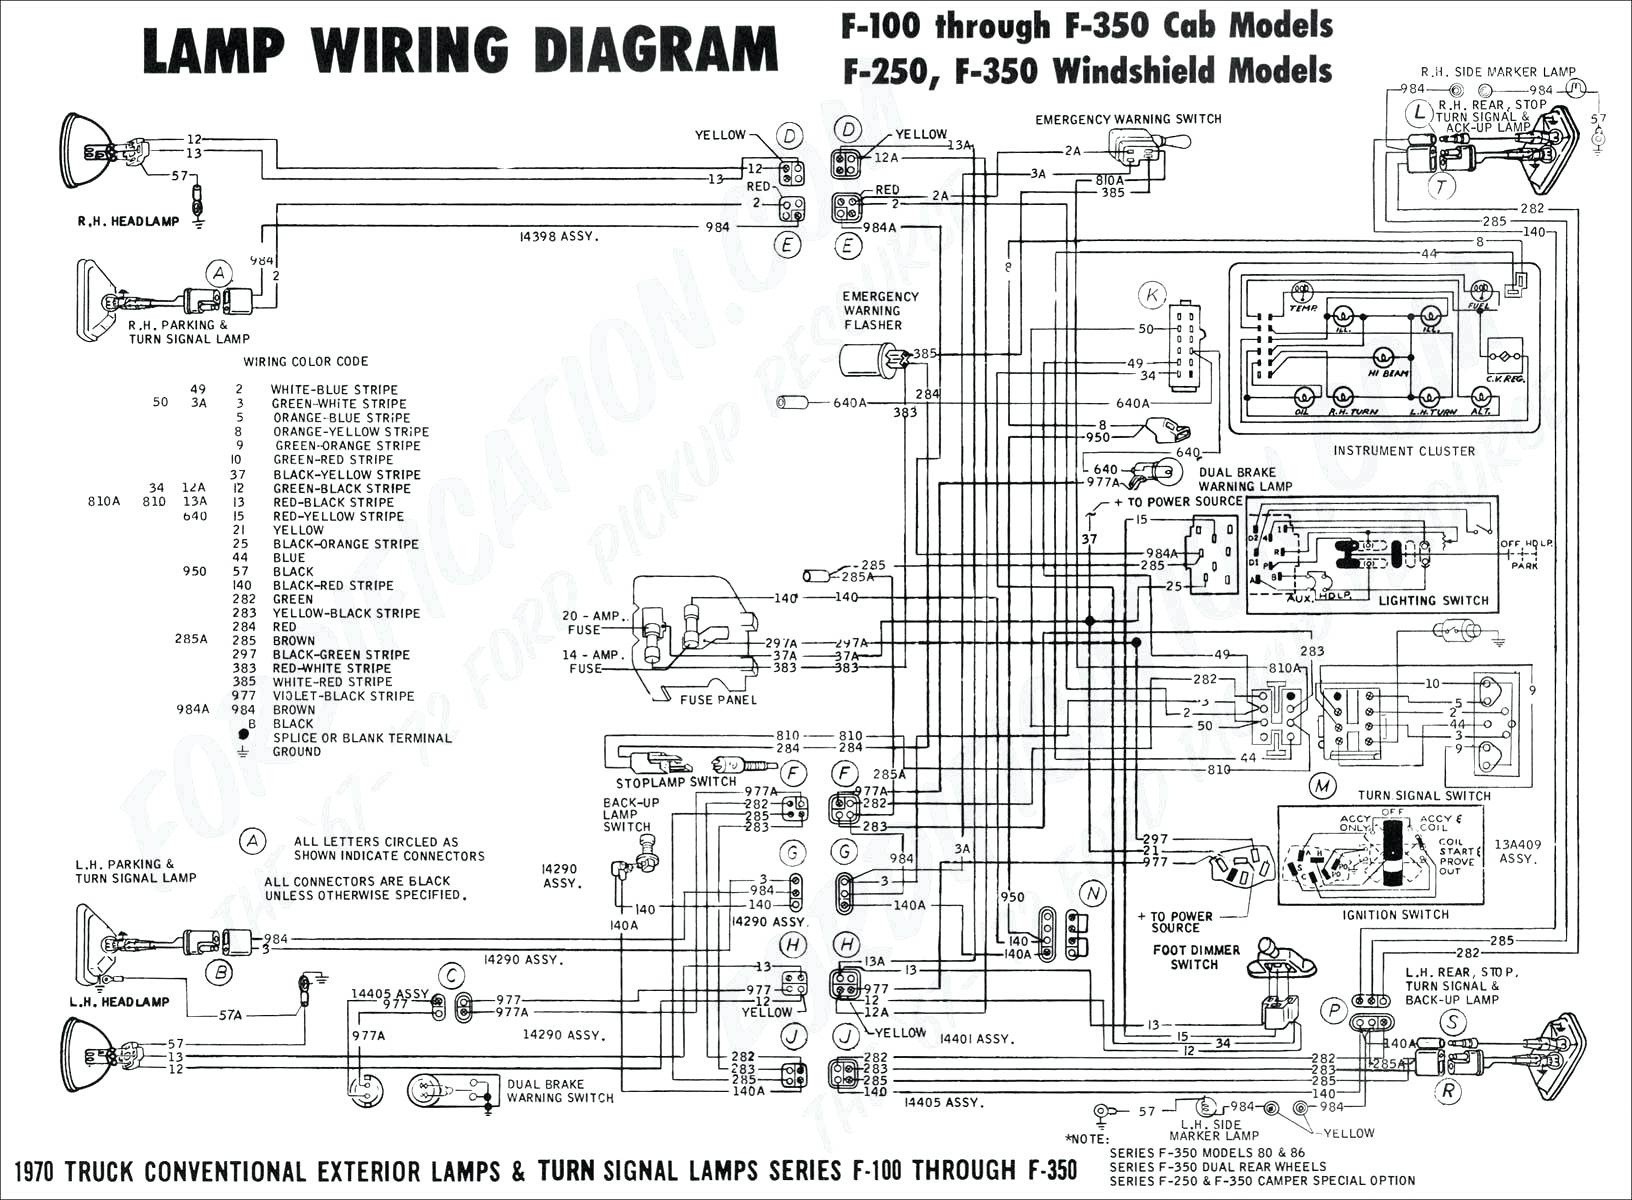 1999 ford Expedition Engine Diagram 1999 F53 Wiring Diagram Experts Wiring Diagram •